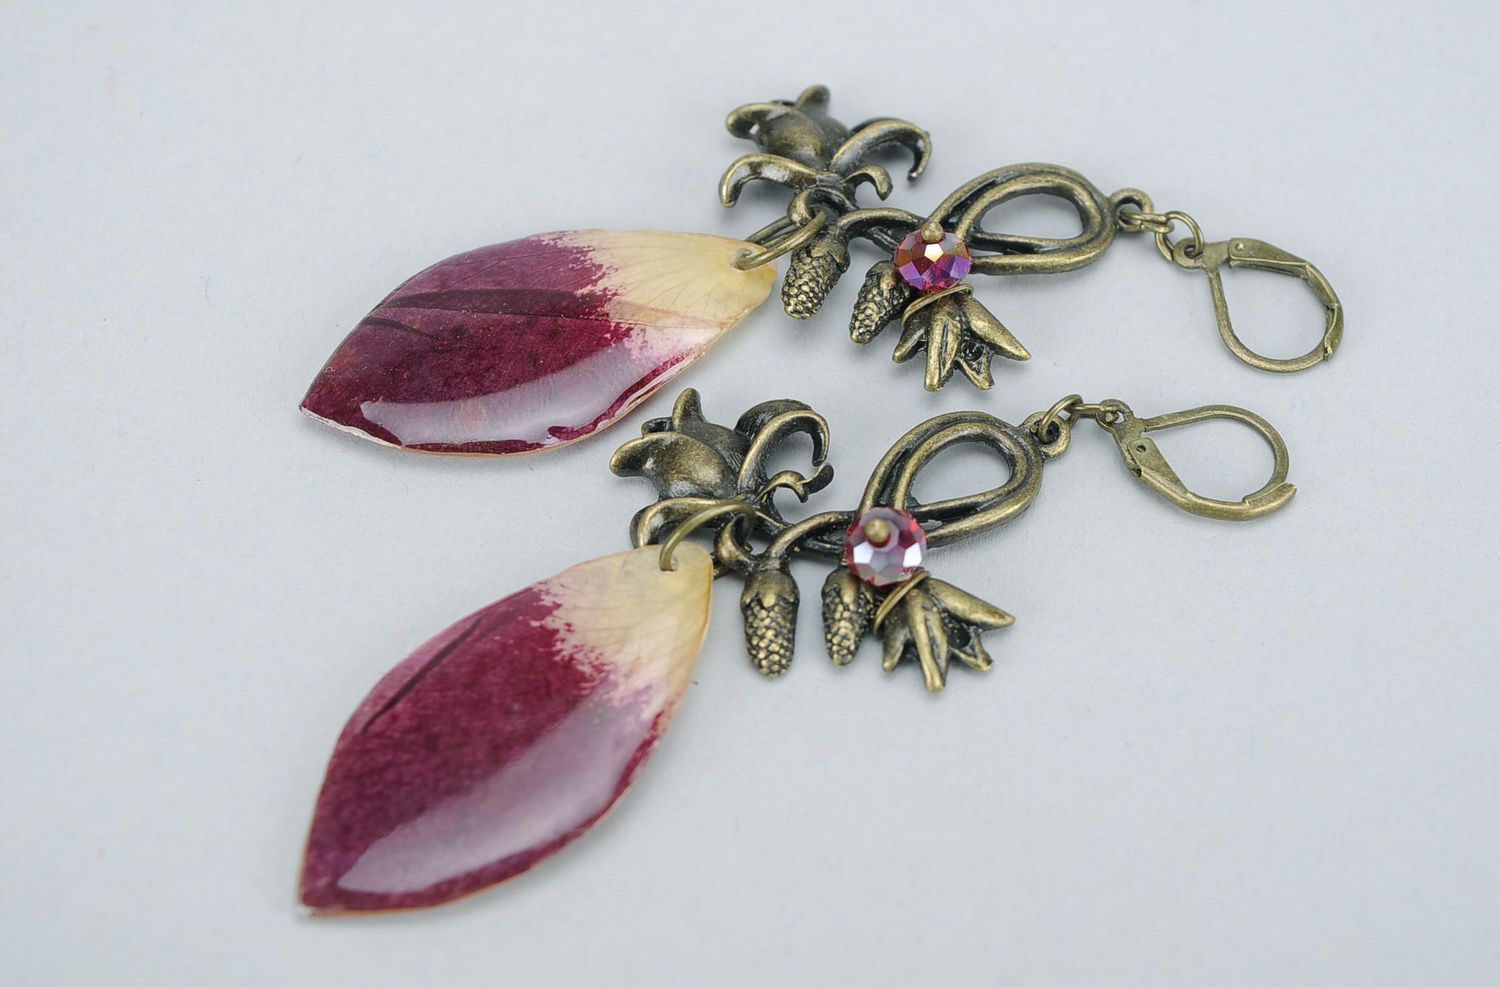 Earrings made from rose petals photo 1